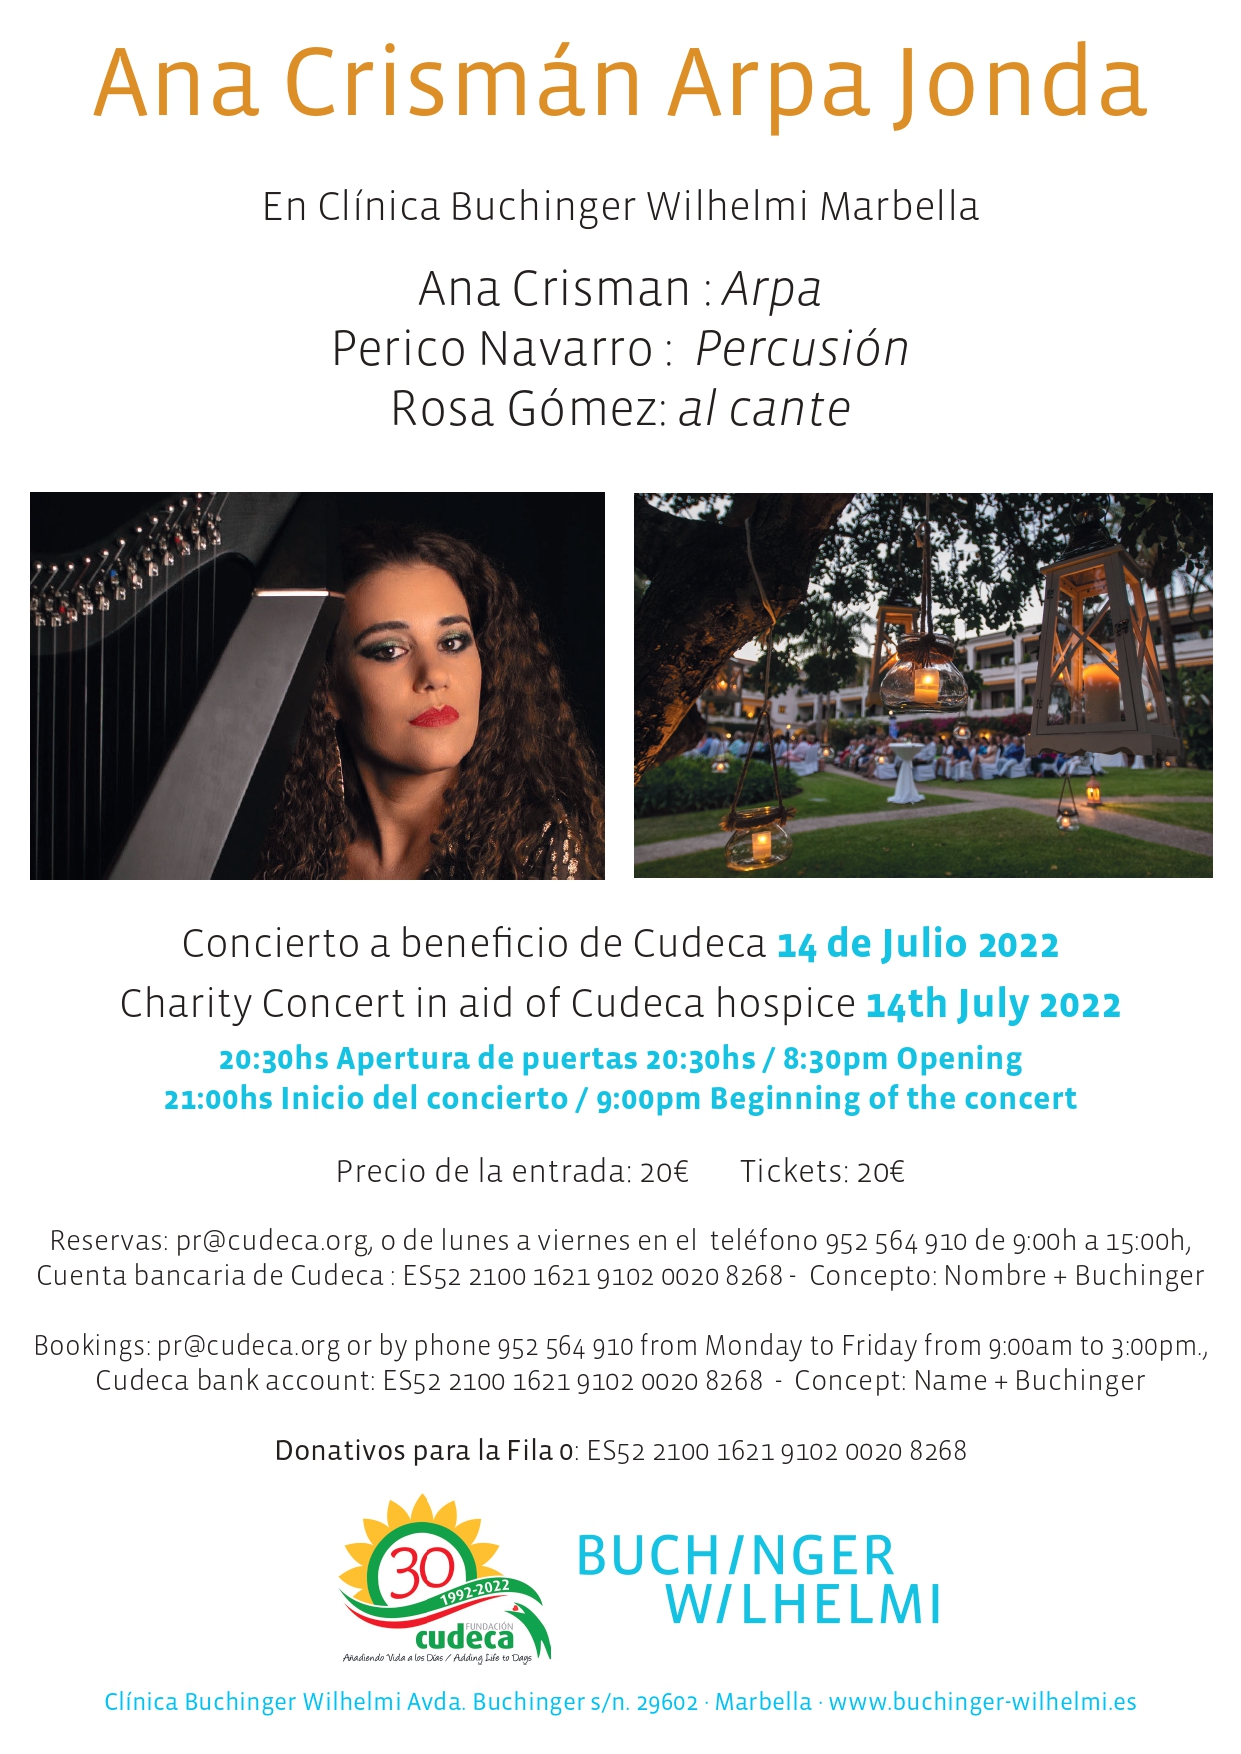 Buchinger Whilhelmi Marbella brings back their traditional Summer Concert in aid of Cudeca Hospice!